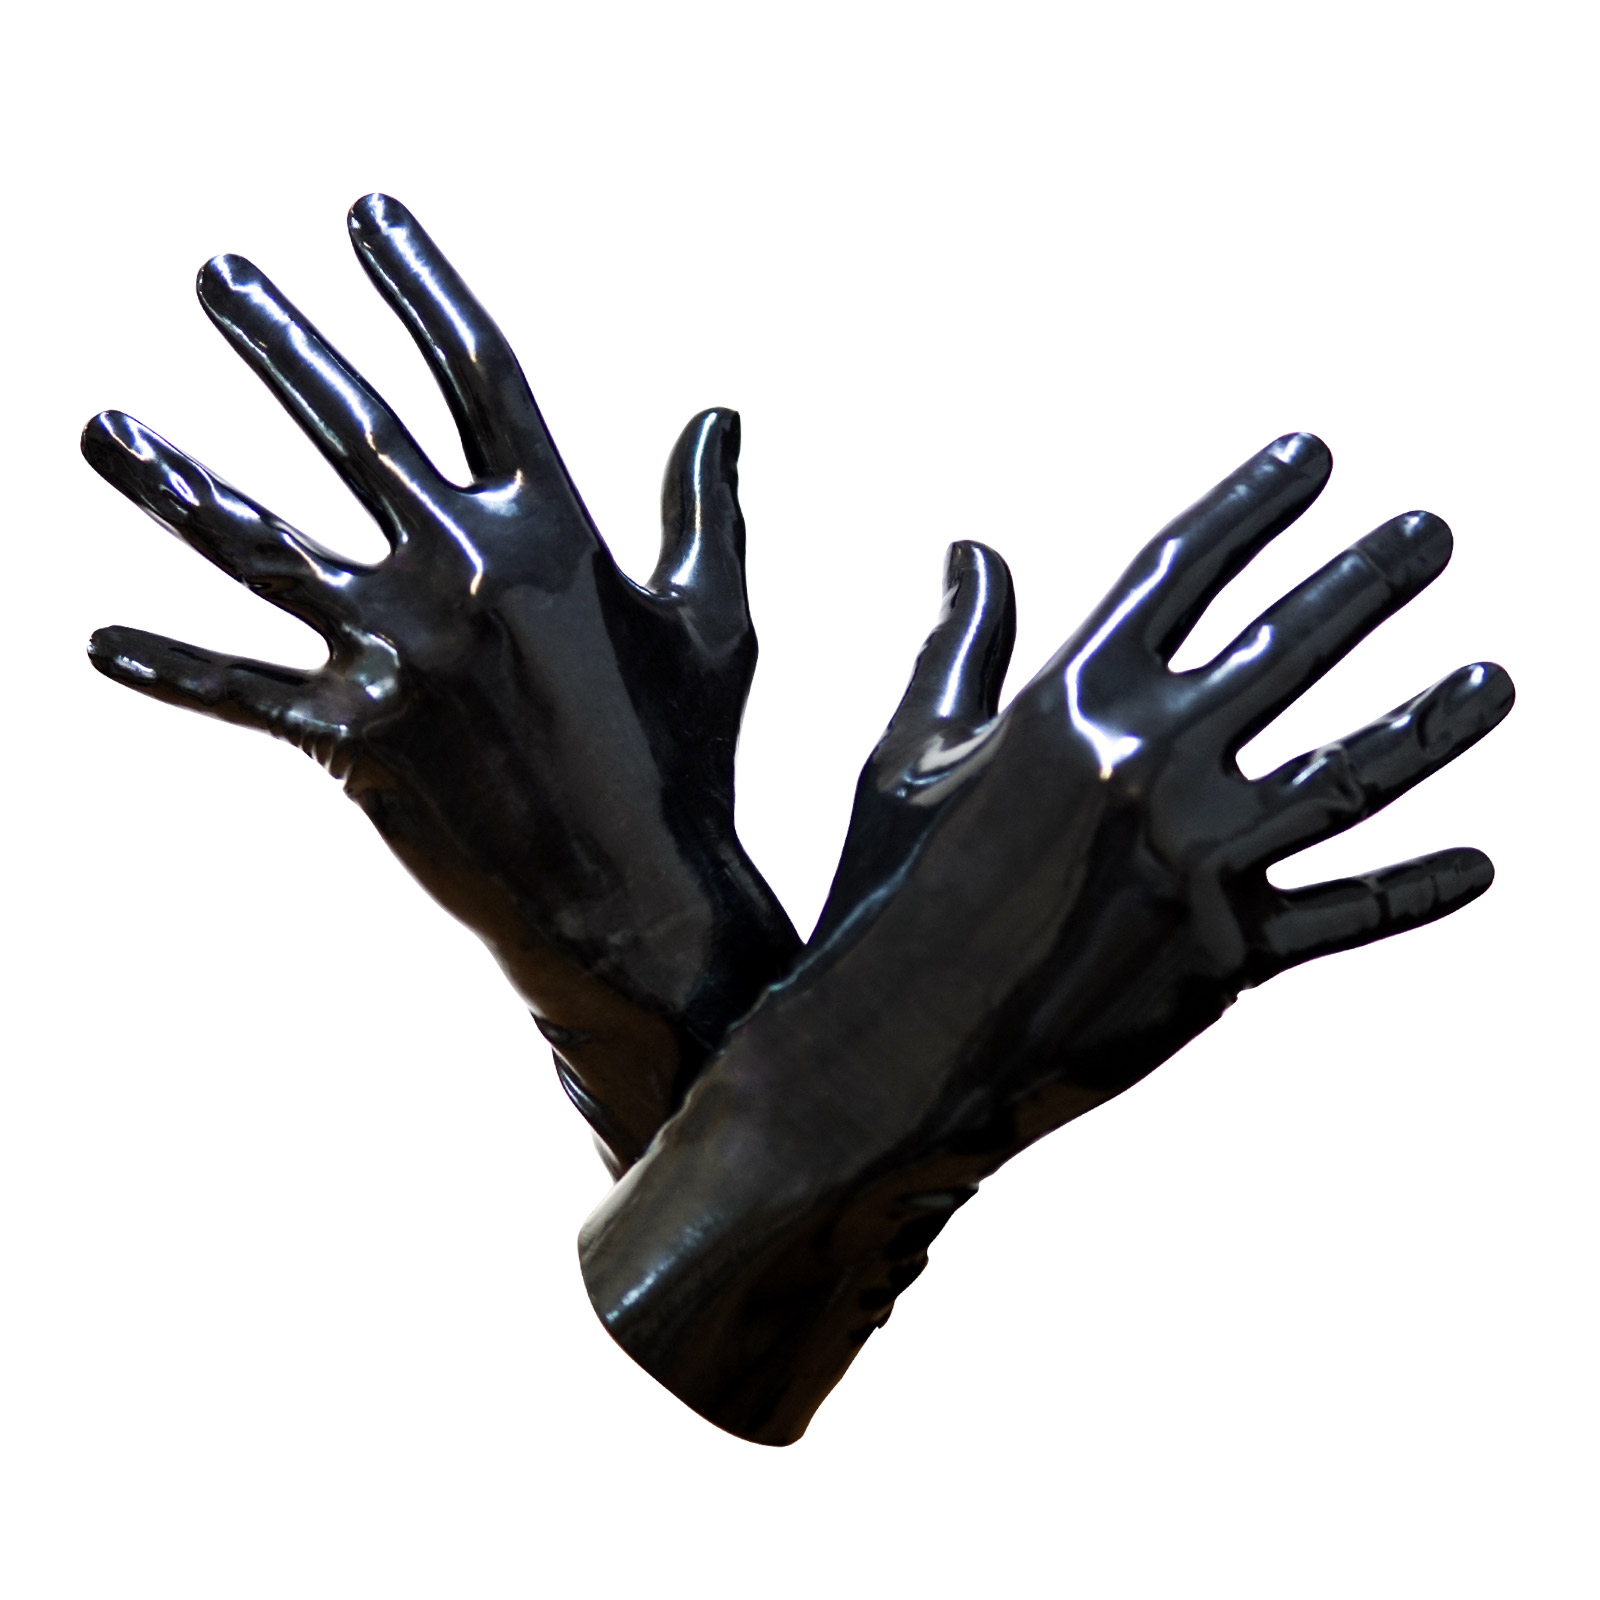 Toylie Latex Gloves «S» black, seamless, with excellent anatomic fit